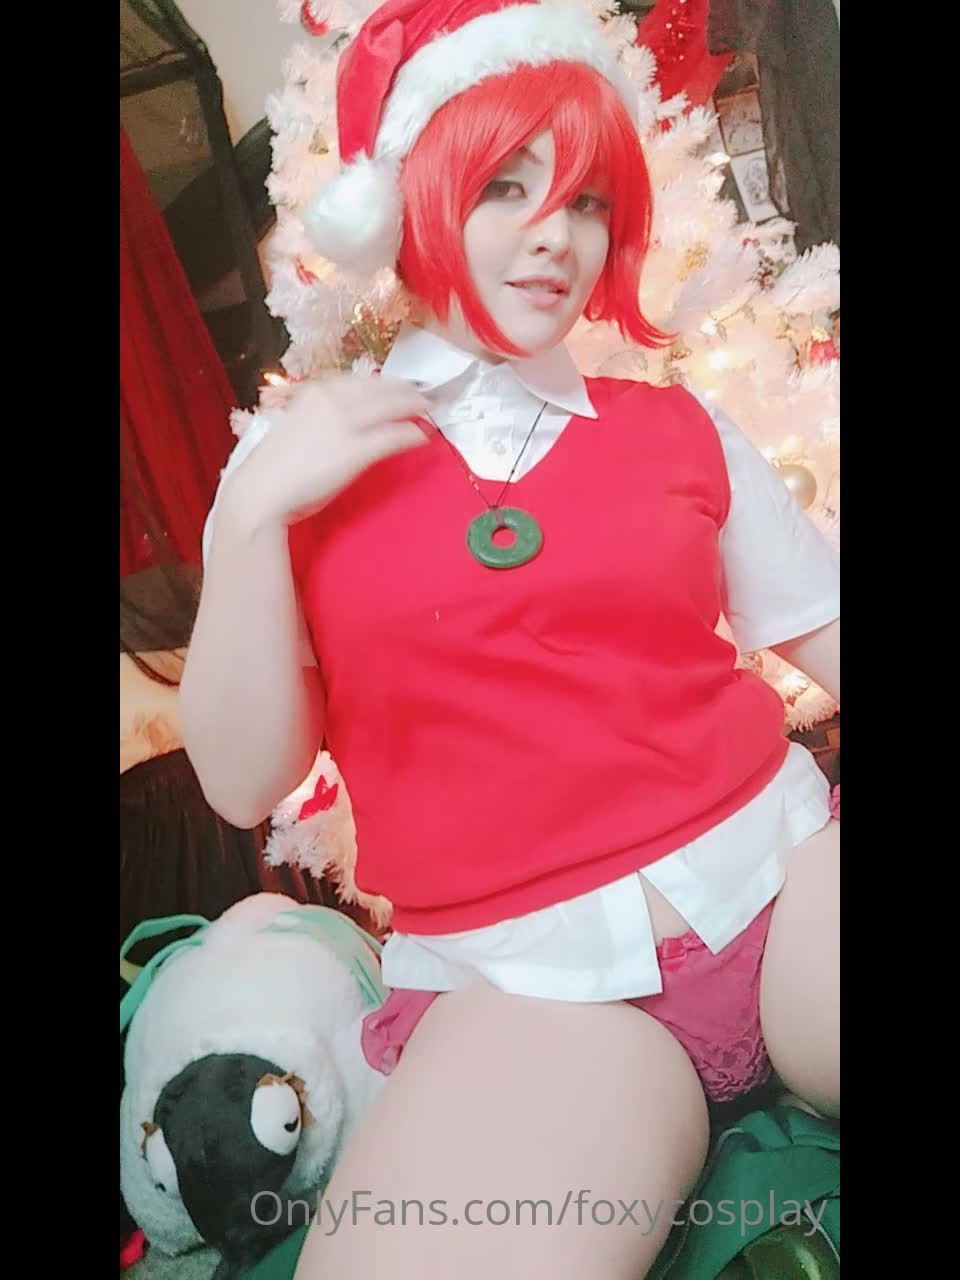 Onlyfans - foxycosplay - Chise Hatori wants to wish you a happy xmas and Yule with some pussy - 22-12-2020